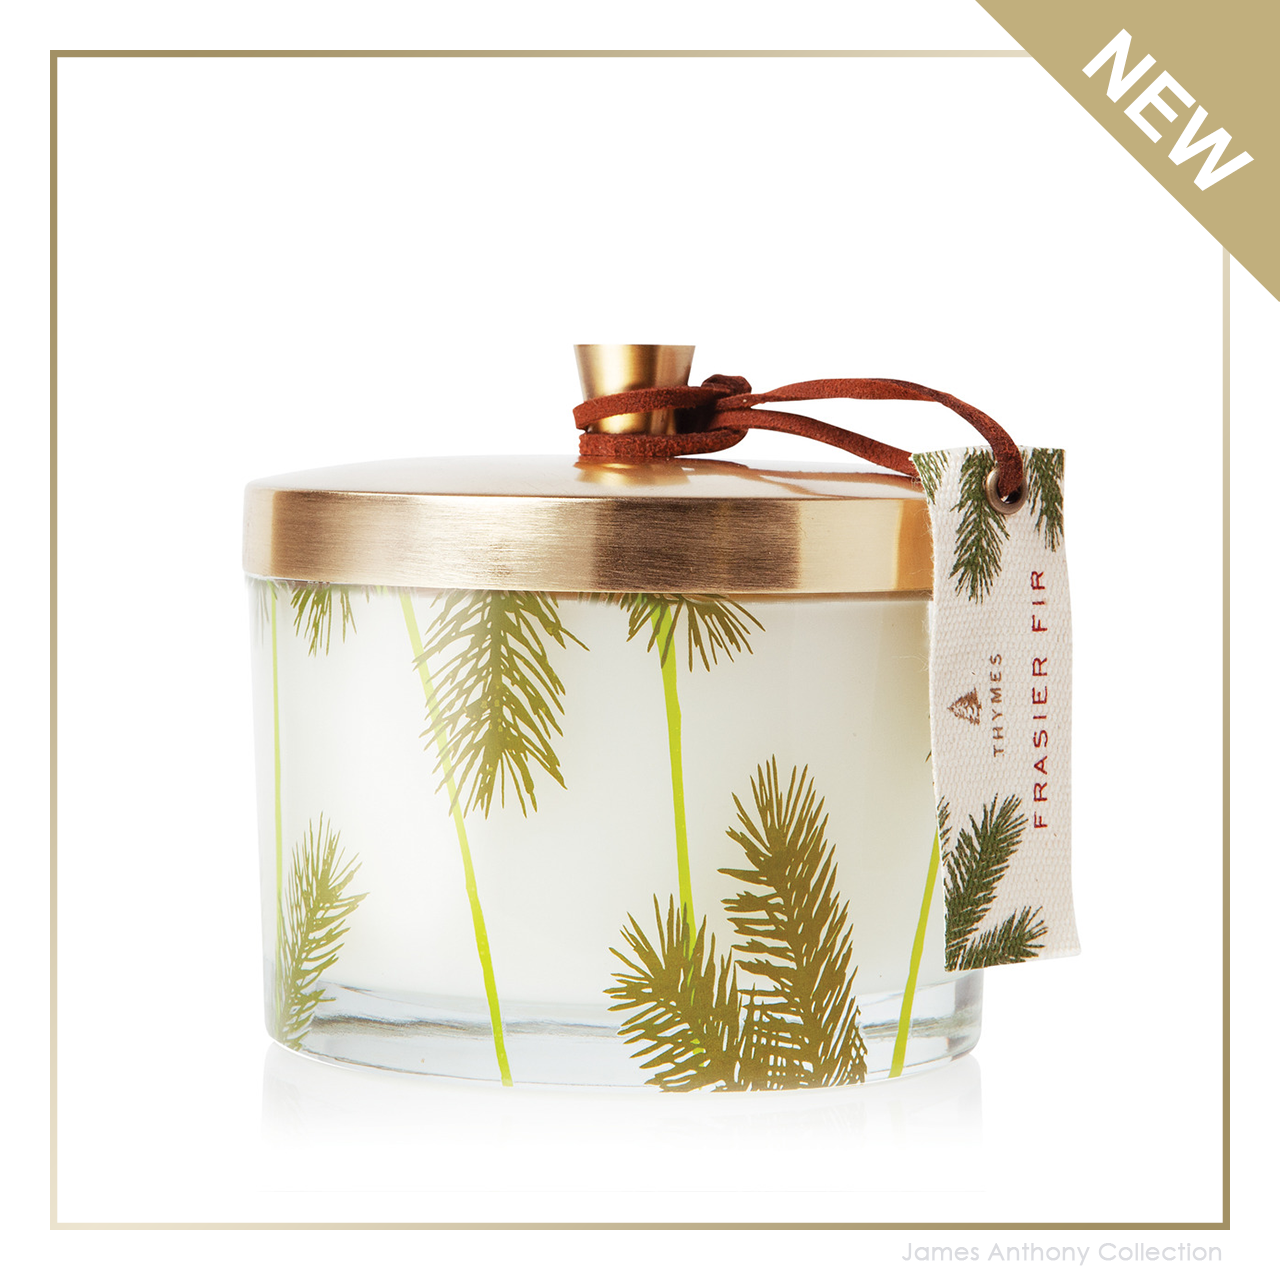 Thymes Frasier Fir Statement Pine Needle Candle 2 Oz - Digs N Gifts